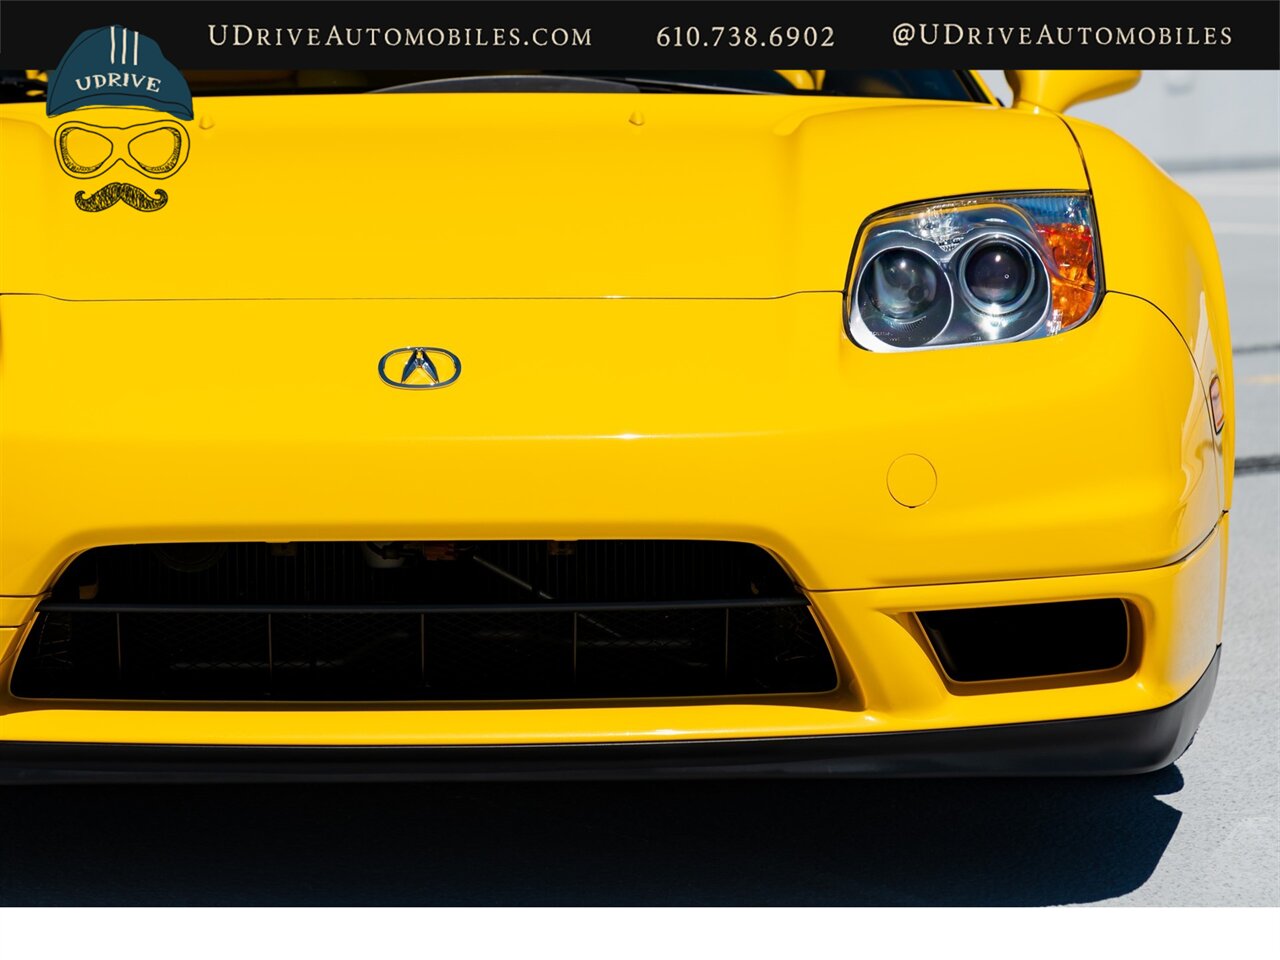 2003 Acura NSX NSX-T  Spa Yellow over Yellow Lthr 1 of 13 Produced - Photo 12 - West Chester, PA 19382